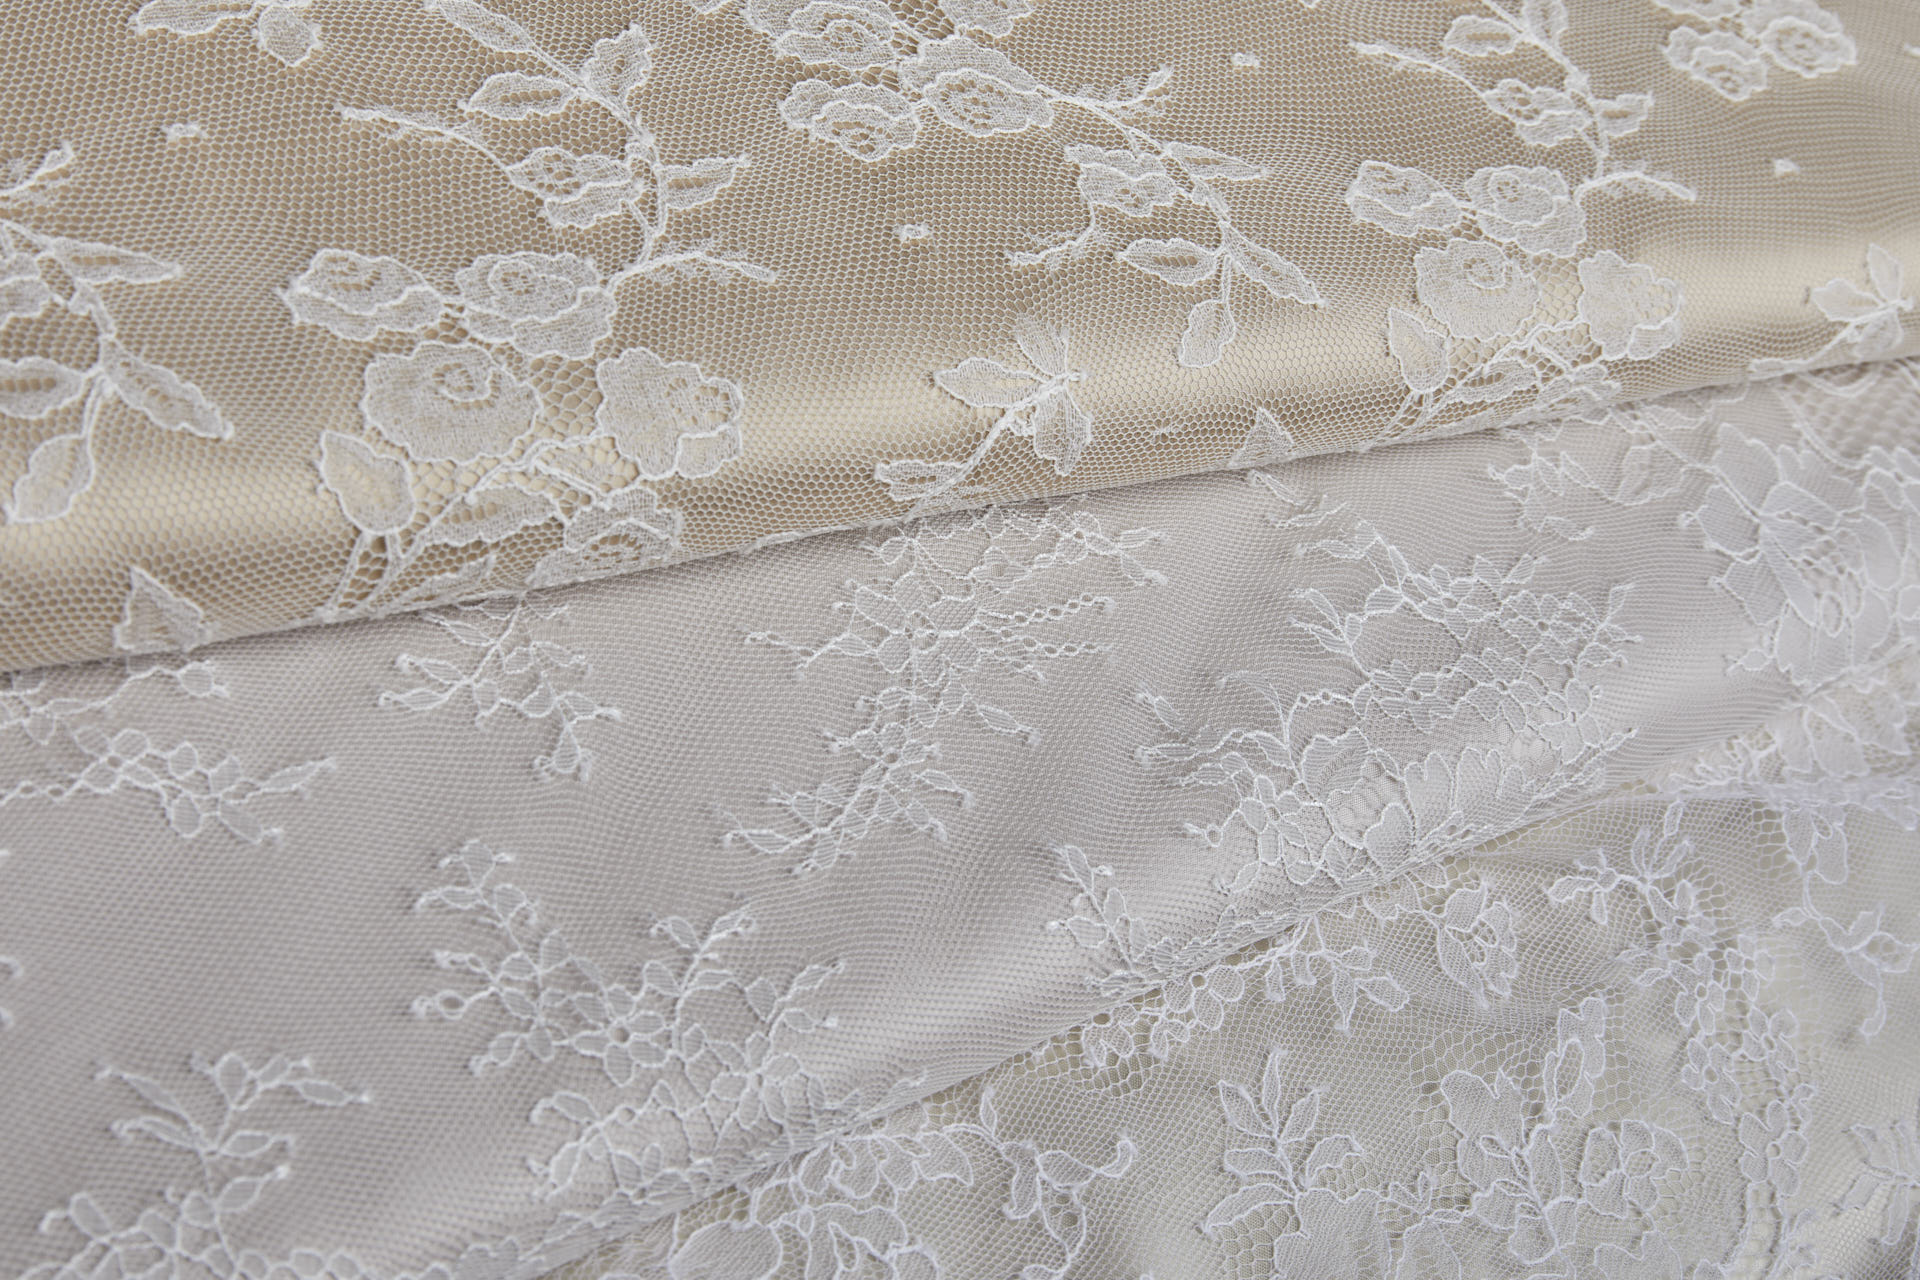 Chantilly Lace for the bride